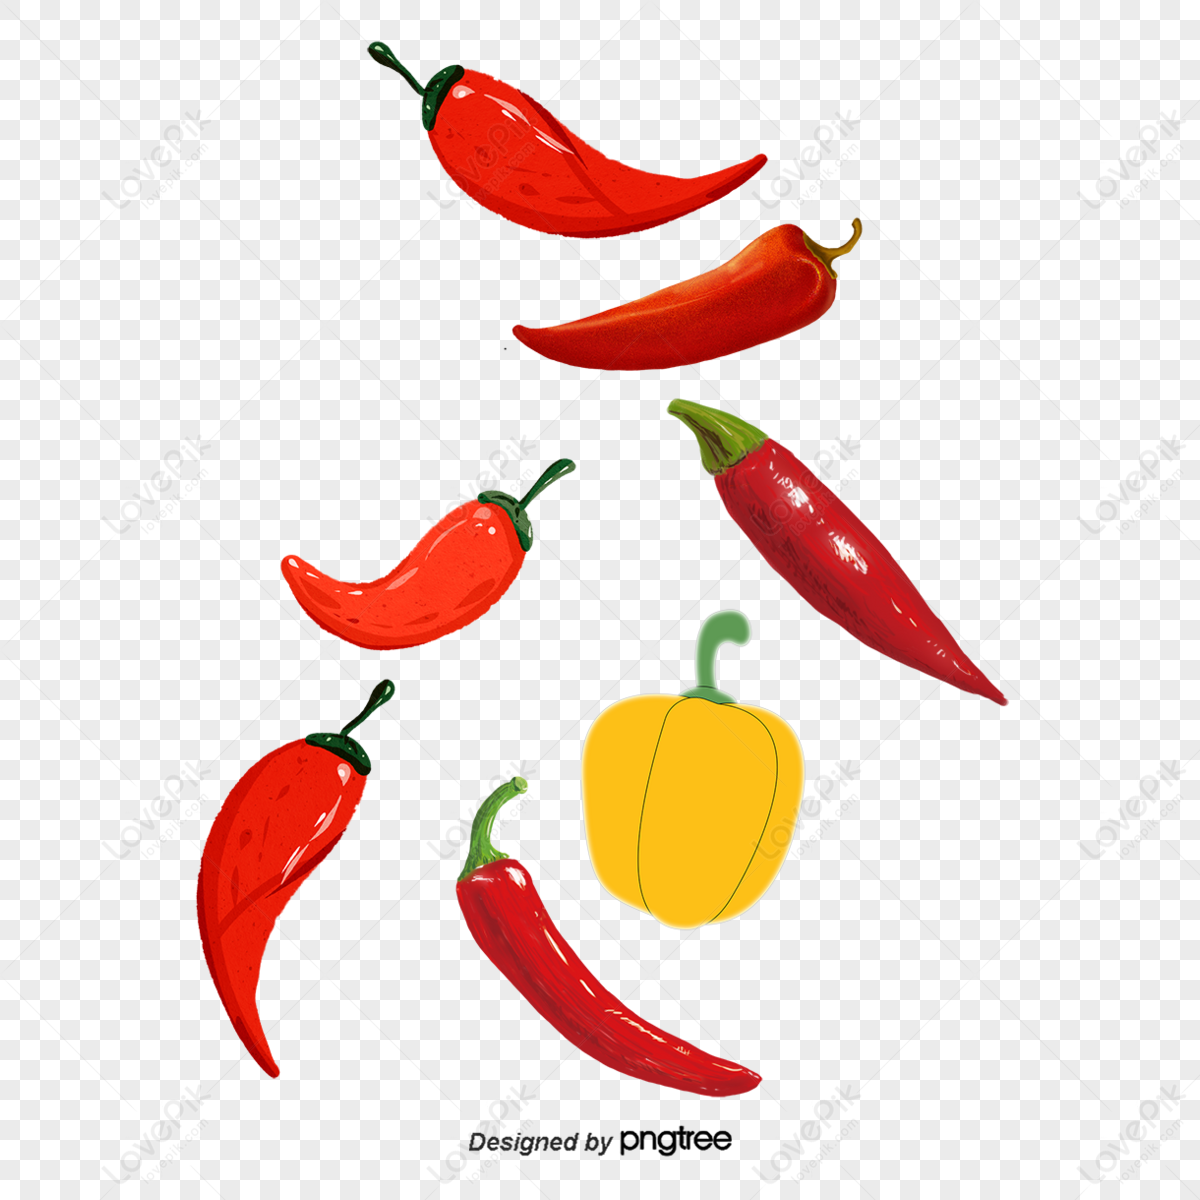 Red Chilli Pepper Sketch Style Vector Stock Vector (Royalty Free) 453860356  | Shutterstock | Chili pepper, Stuffed peppers, Chili